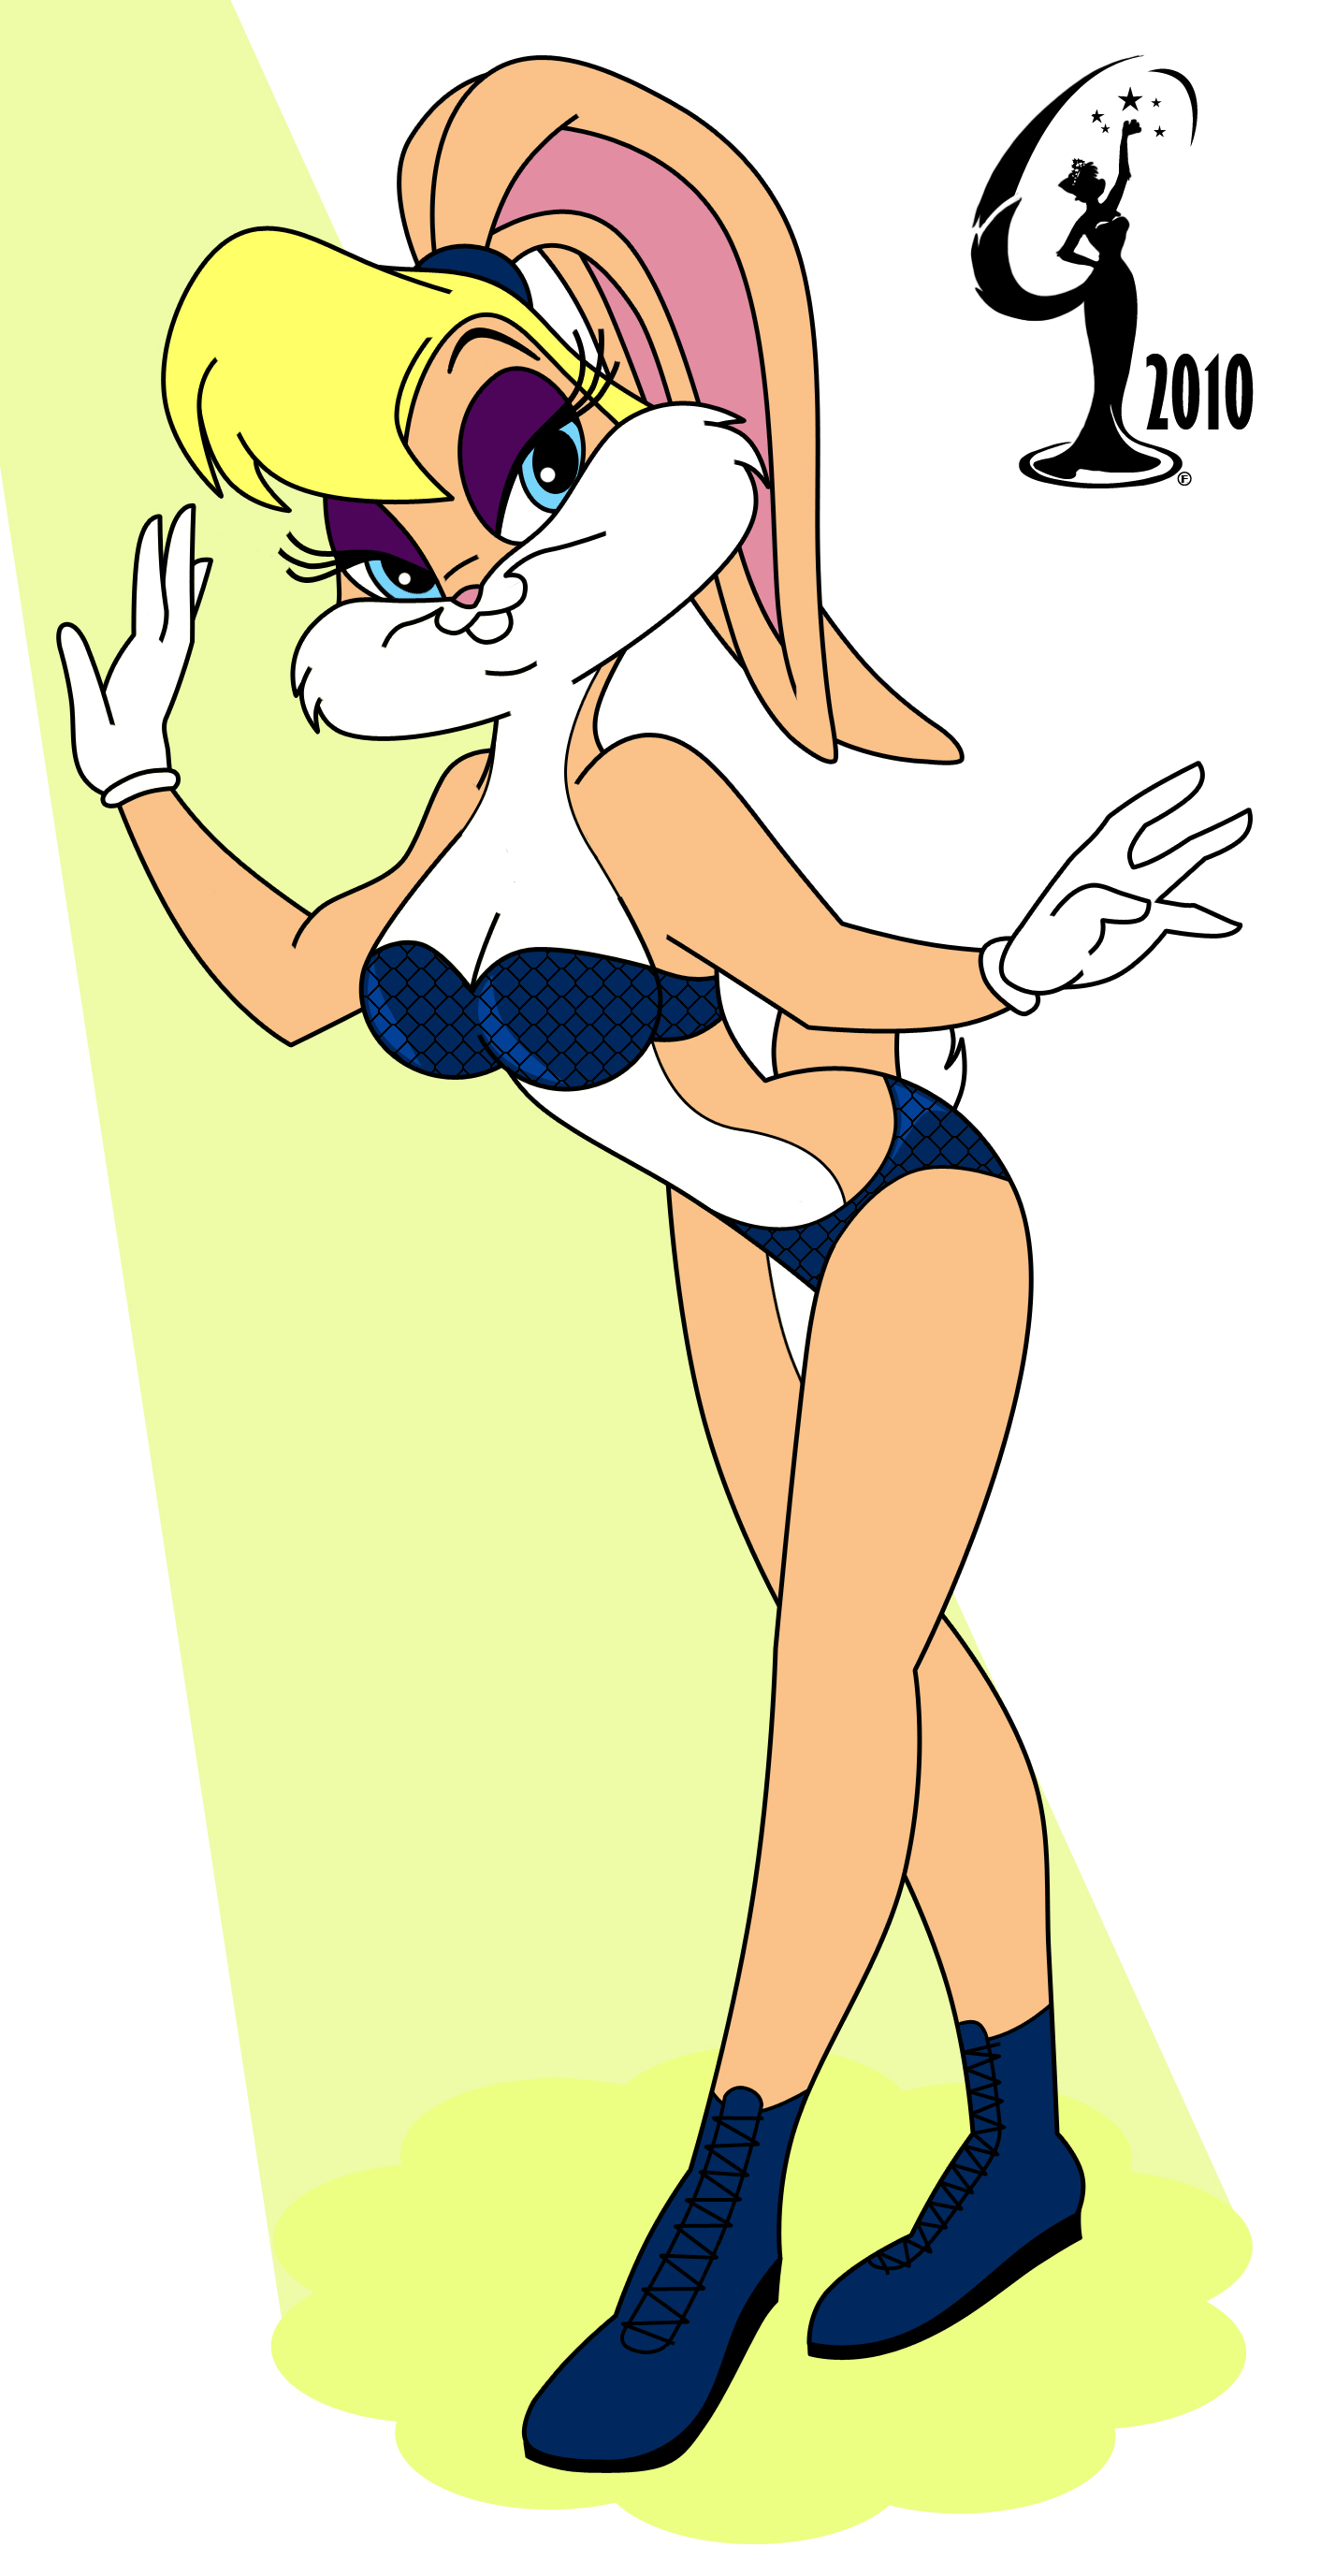 So shave Lola Bunny first, then you're golden? >_>